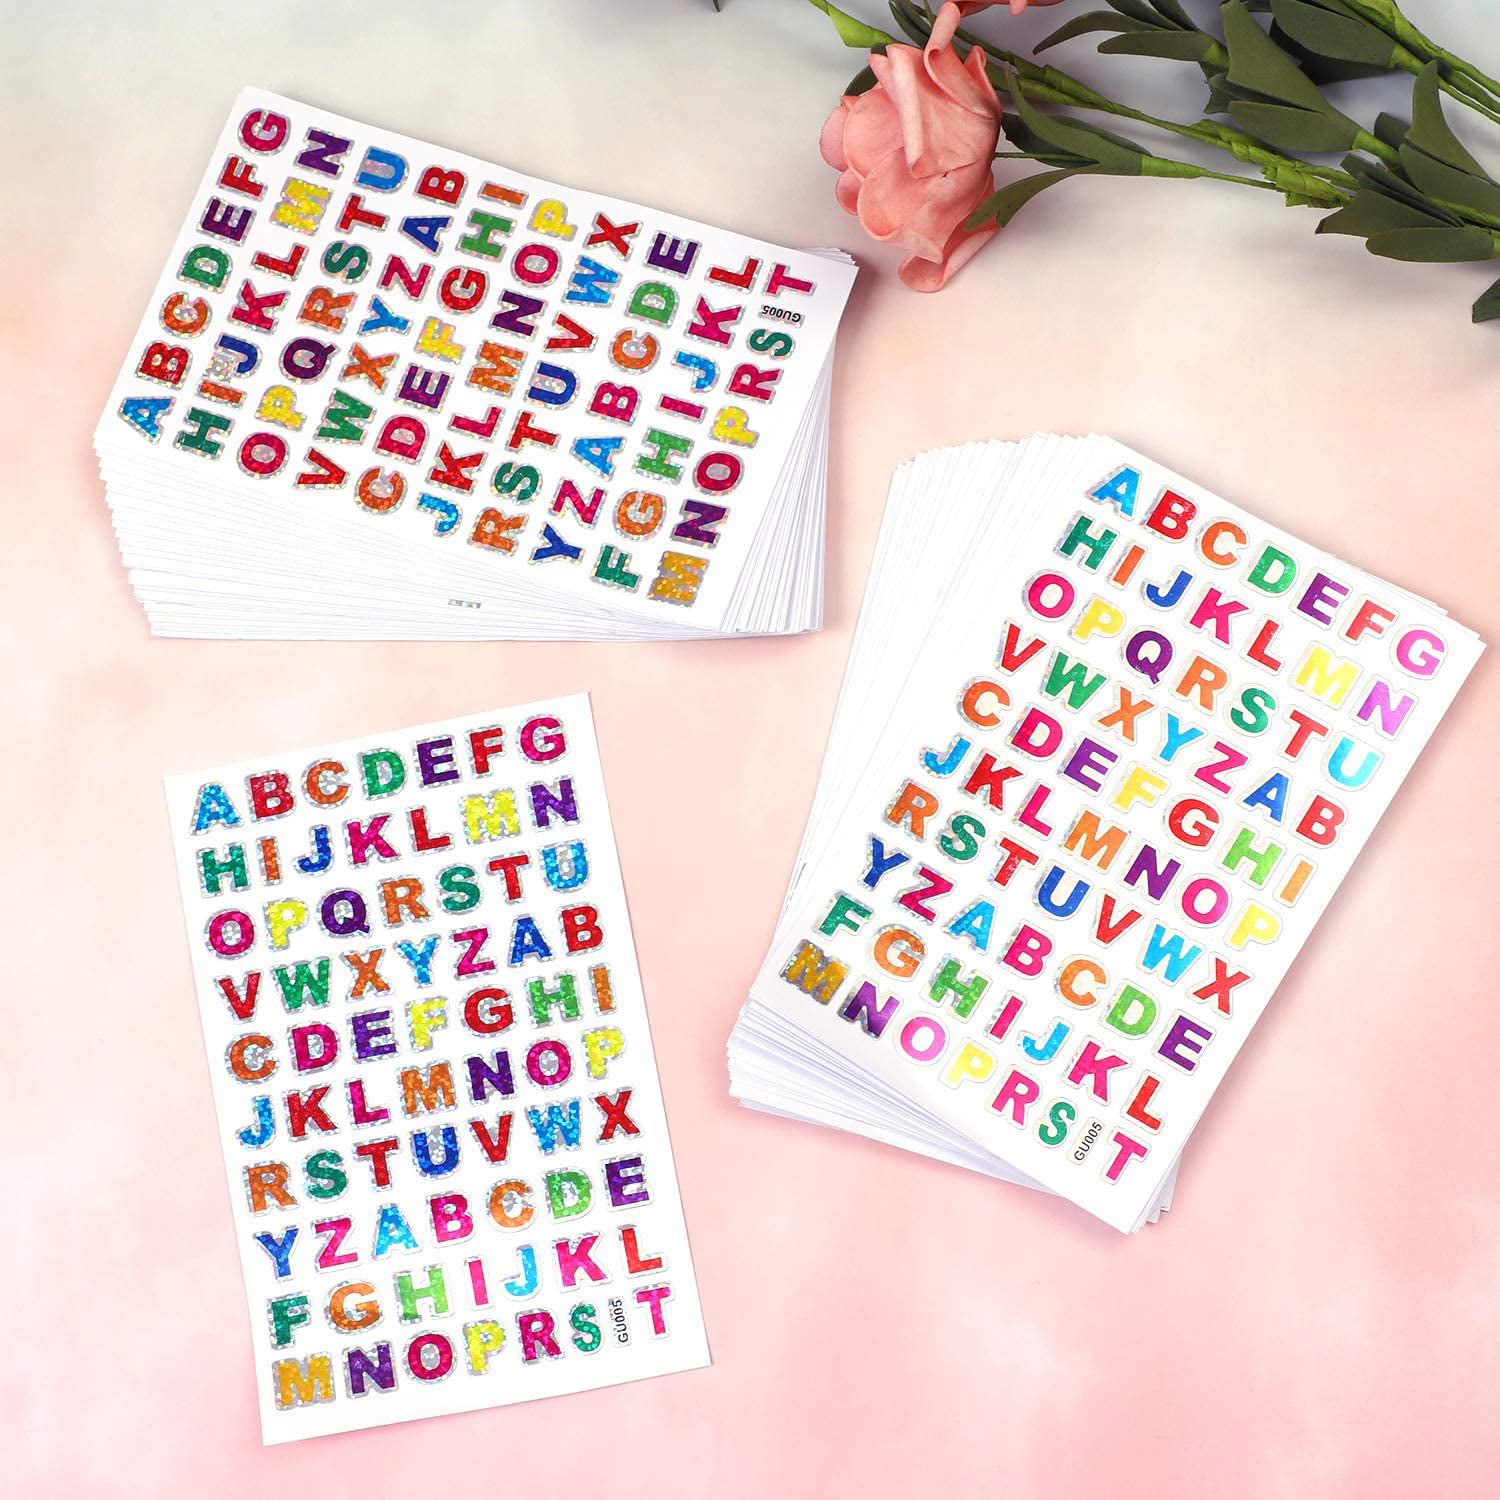 10 Sheets Glitter Alphabet Letter Stickers Self Adhesive Abc A-z Words  Letters Stickers Alphabets Sticker Name Stickers 